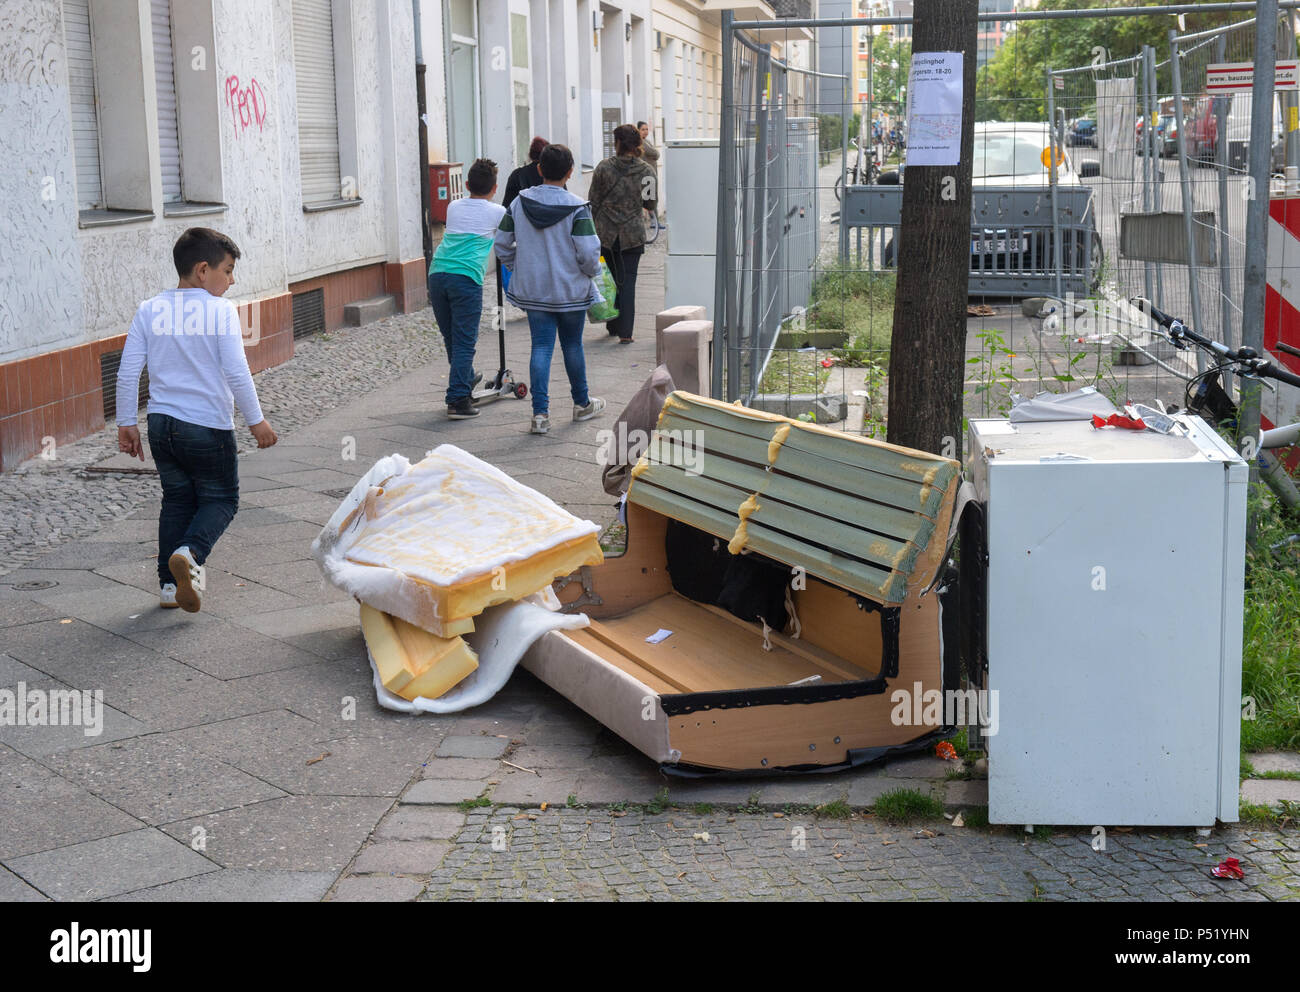 Illegally parked bulky waste in the streets of Berlin Stock Photo